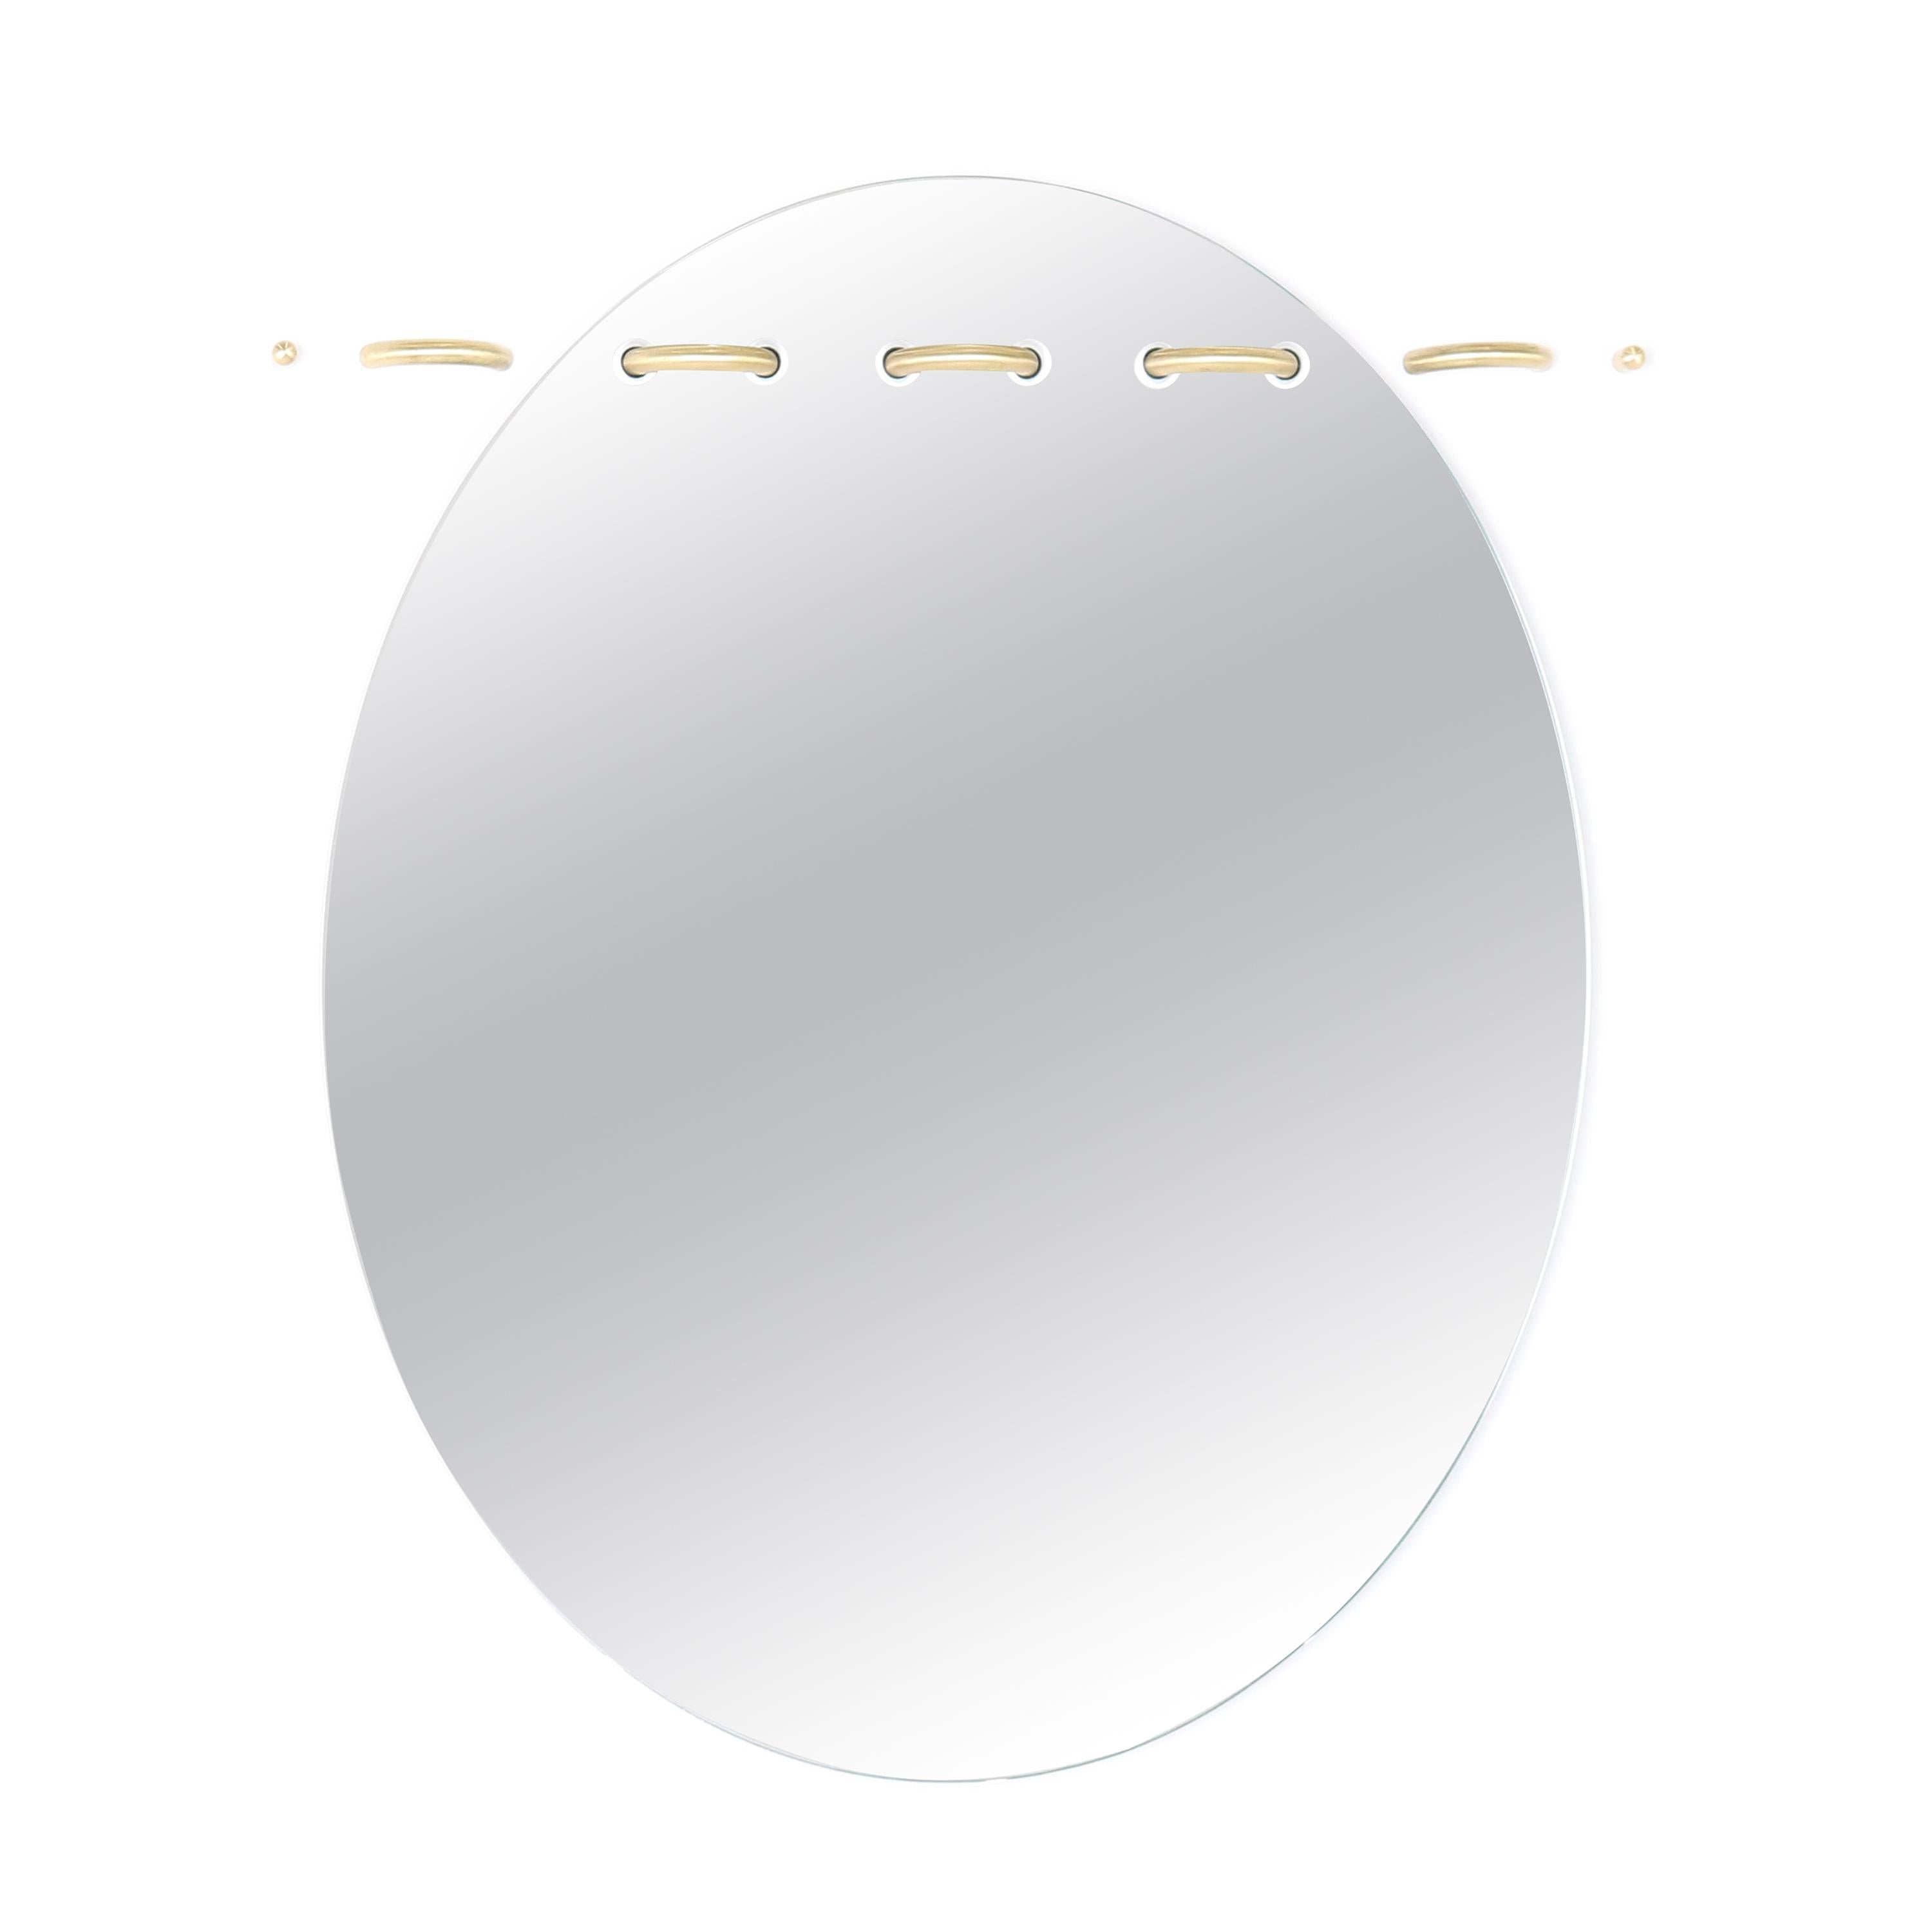 Sewn Surfaces Mirror, Oval with Brass Stitches by Debra Folz For Sale